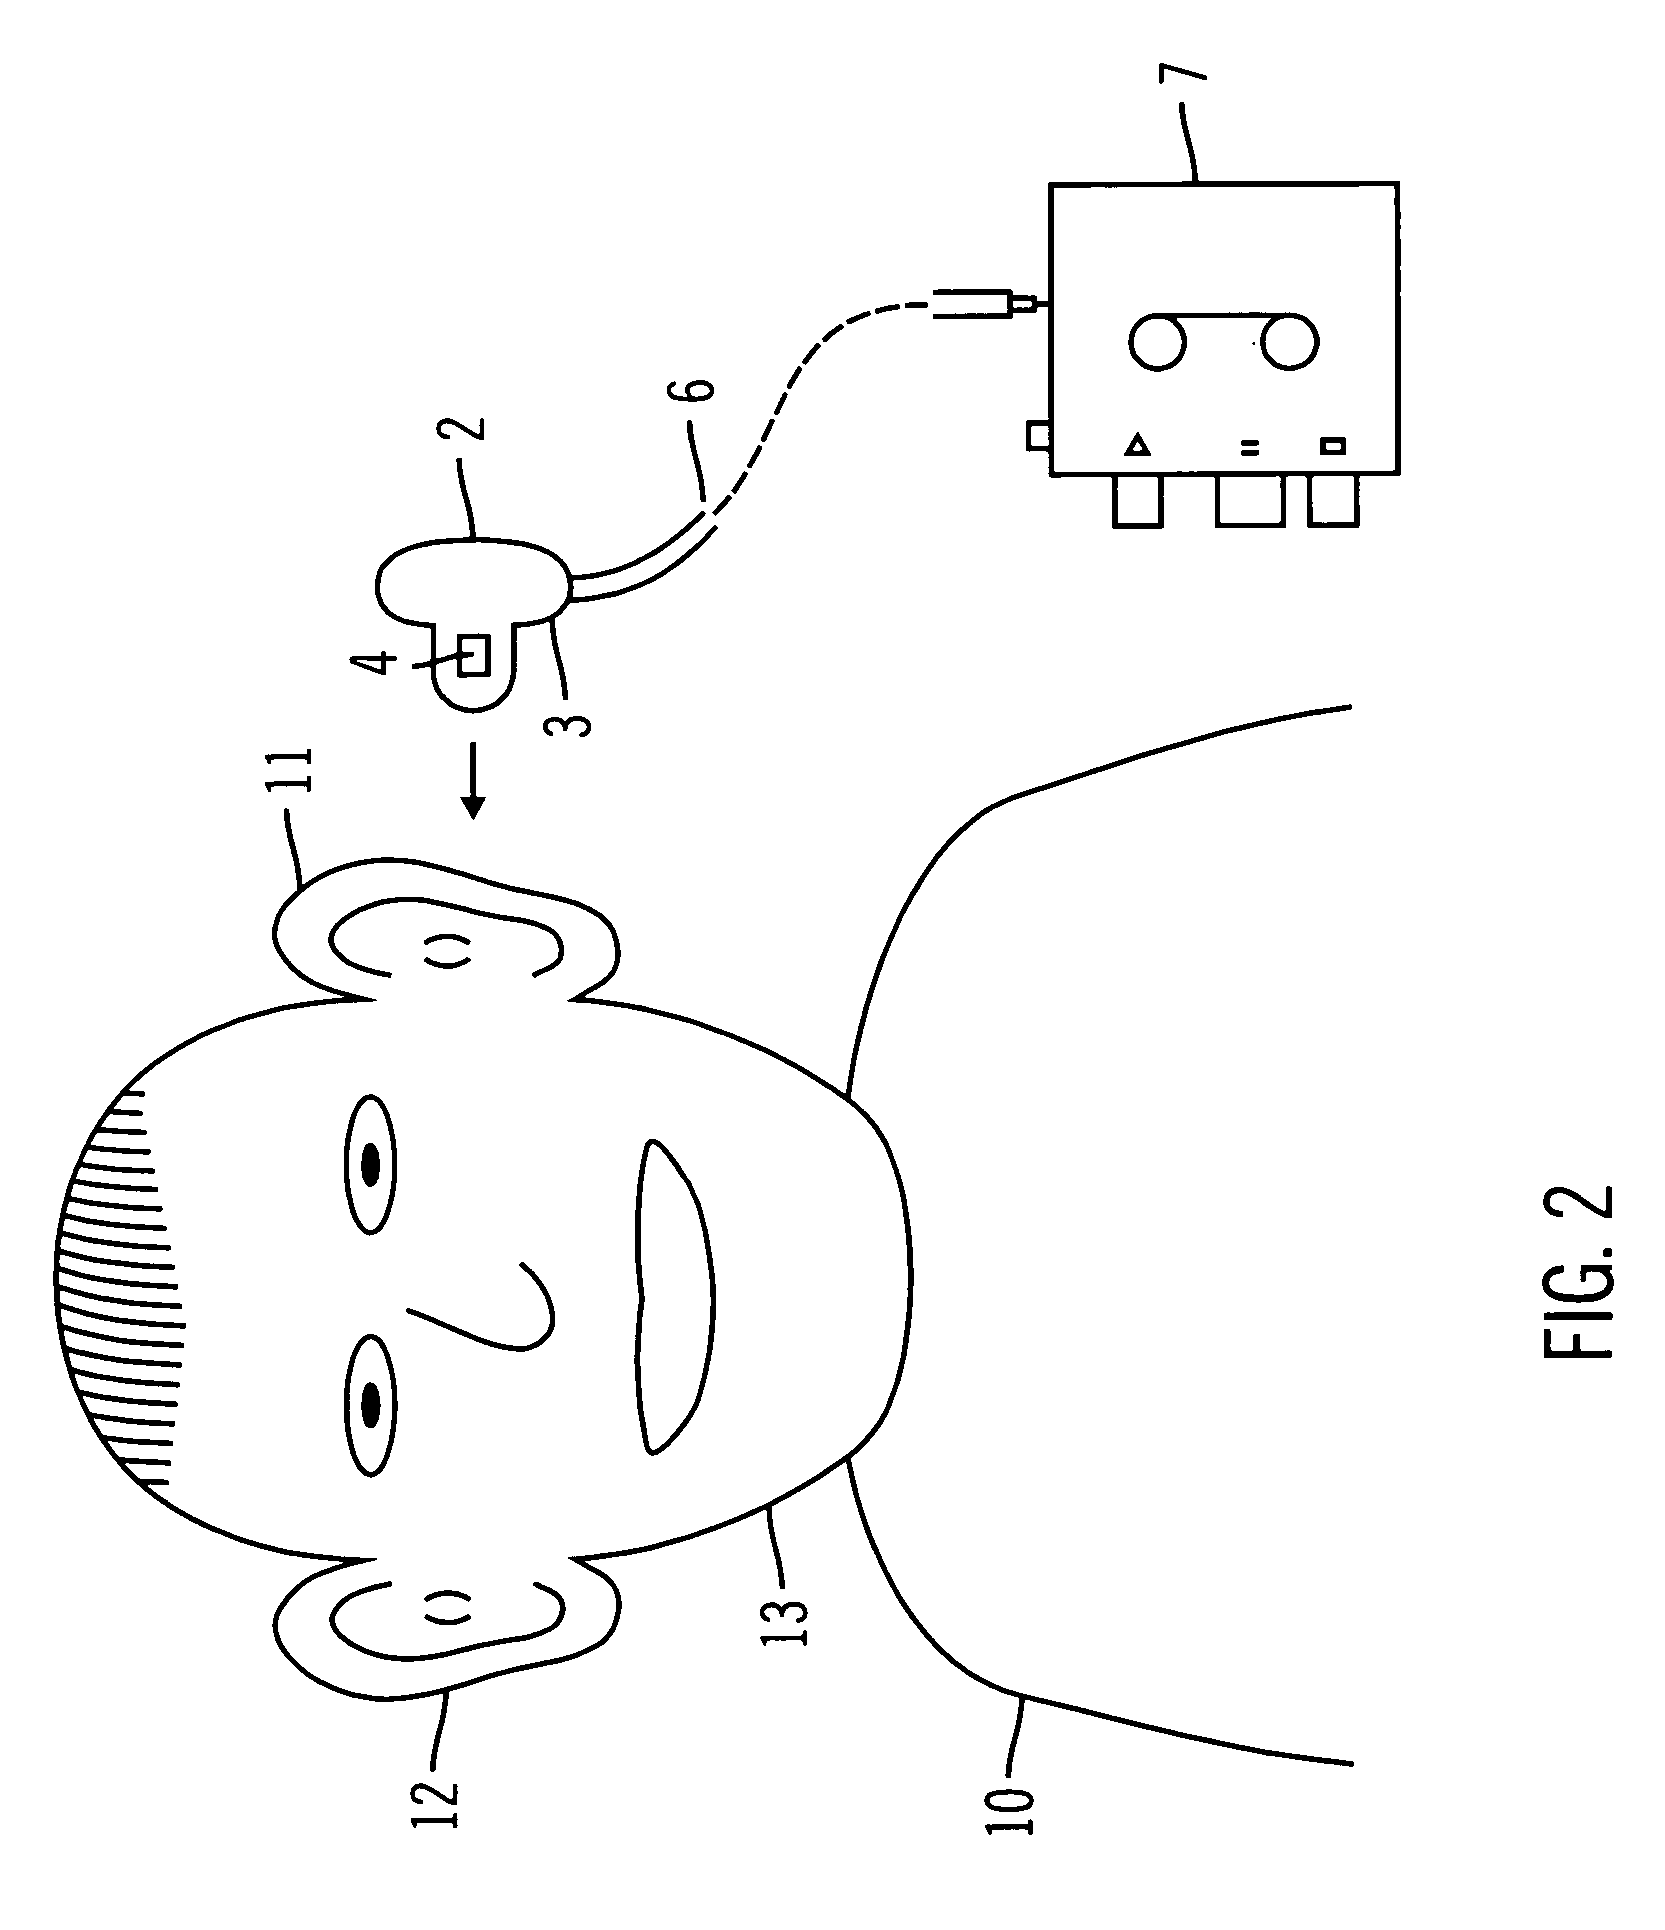 Smart earphone systems devices and methods